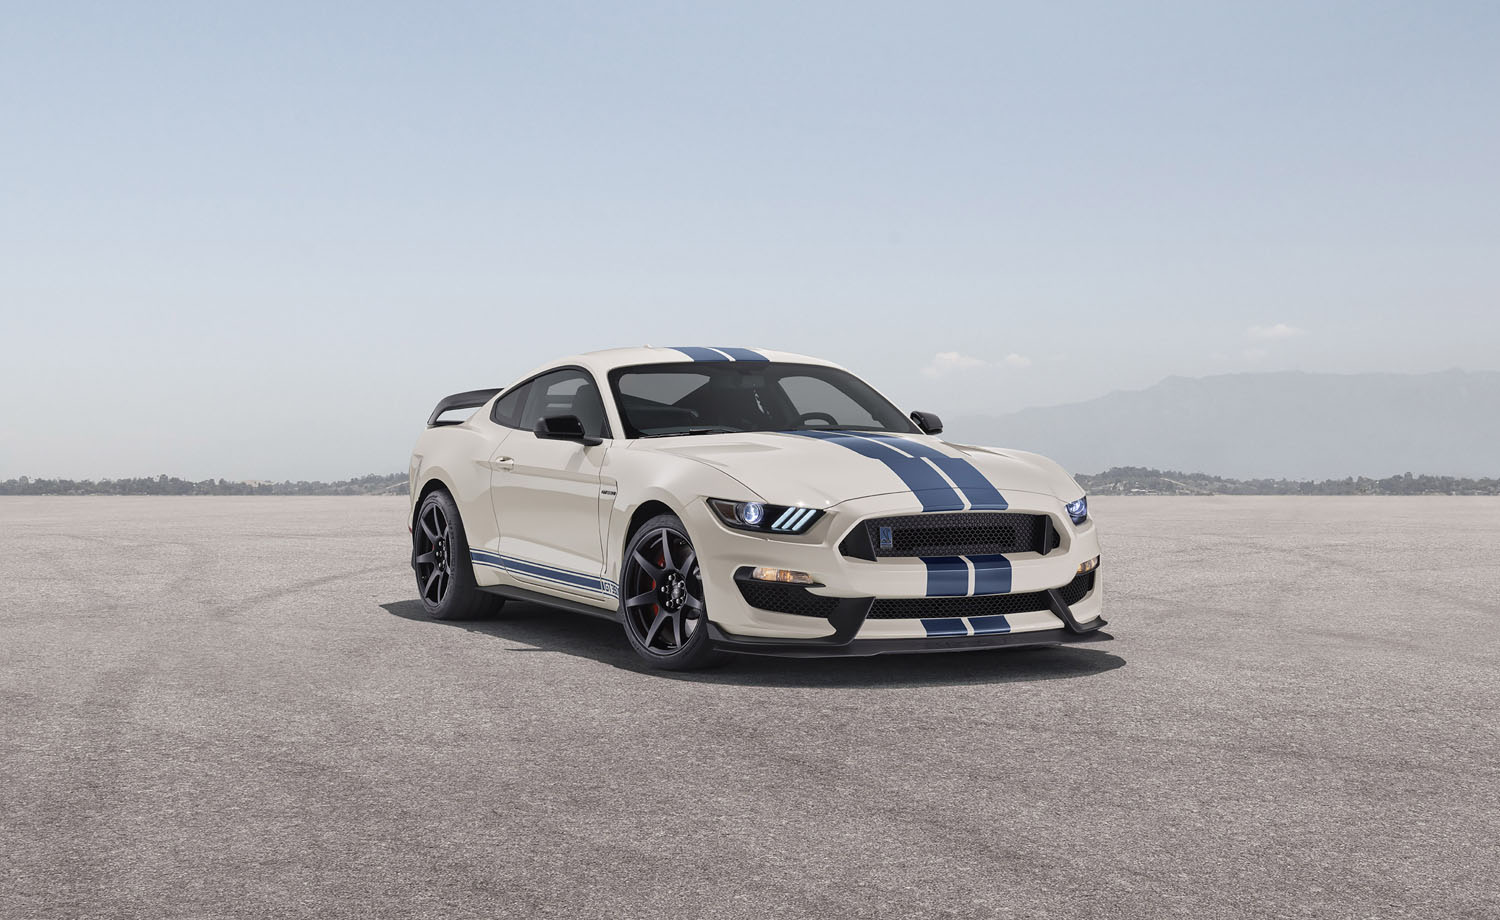 Used Ford Mustang Shelby Gt350 Prices Are Now Affordable For Many